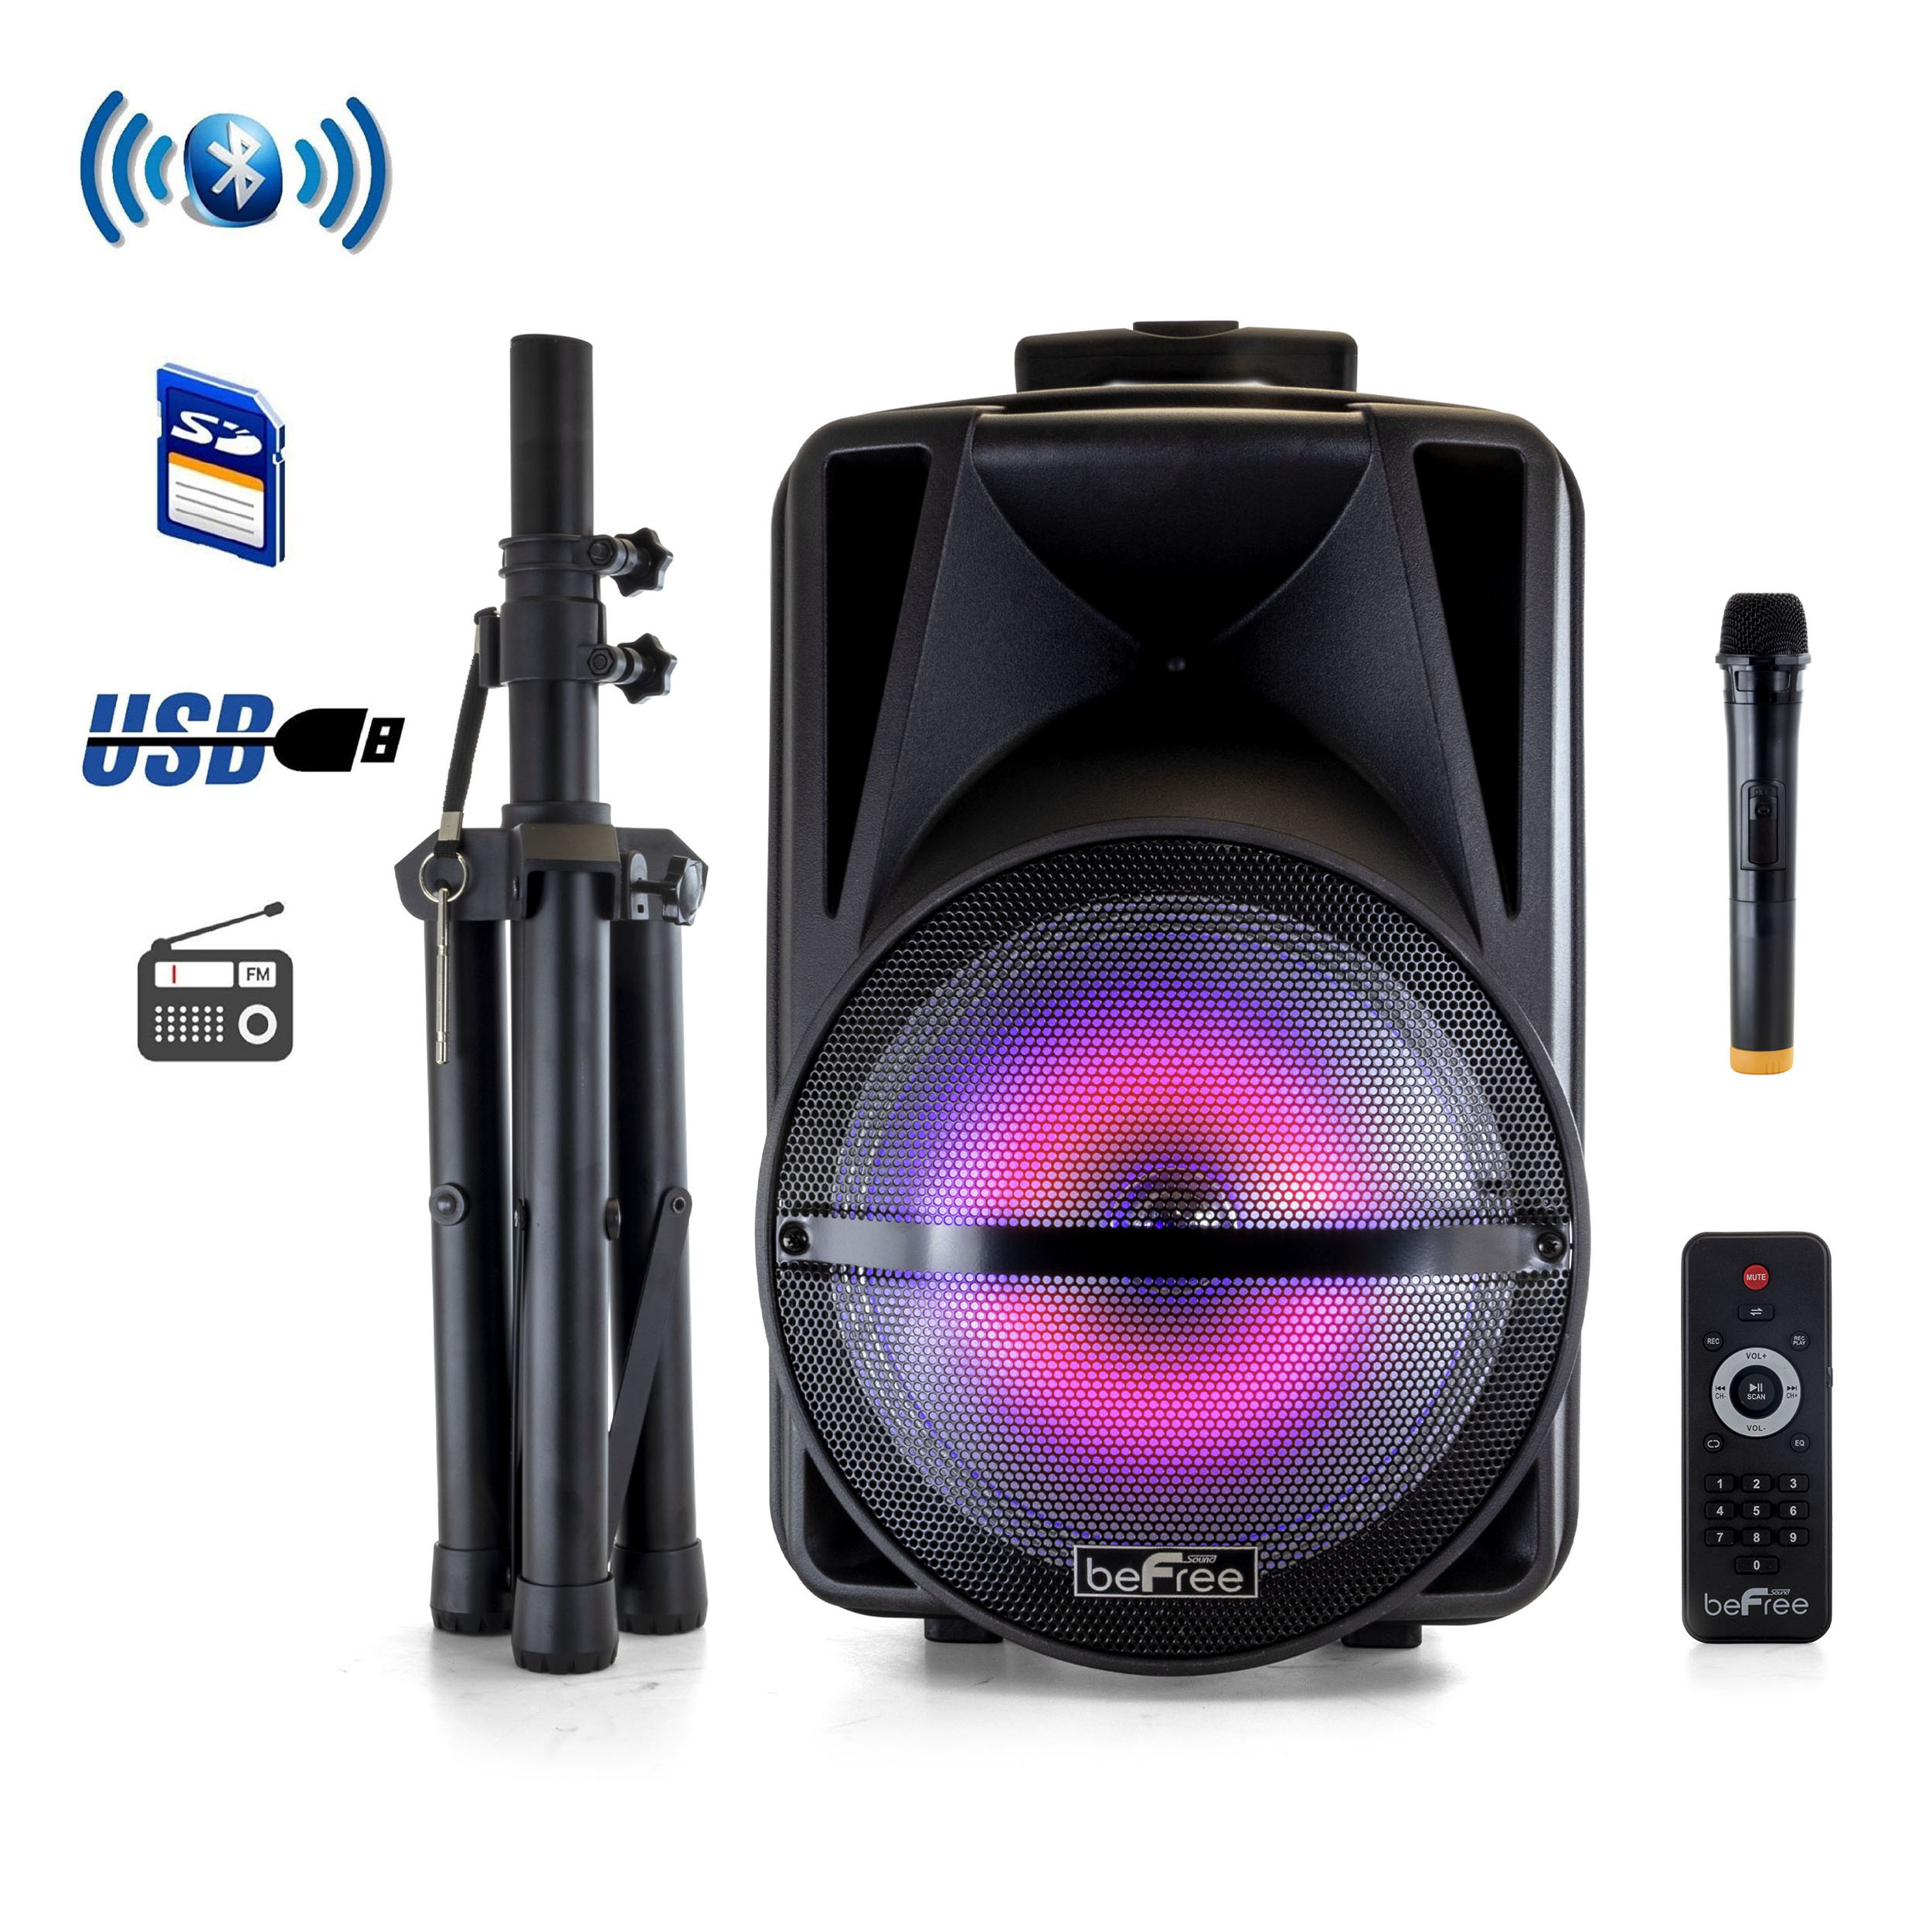 beFree Sound 12 Inch Bluetooth Rechargeable Portable PA Party Speaker with Reactive LED Lights - image 1 of 2